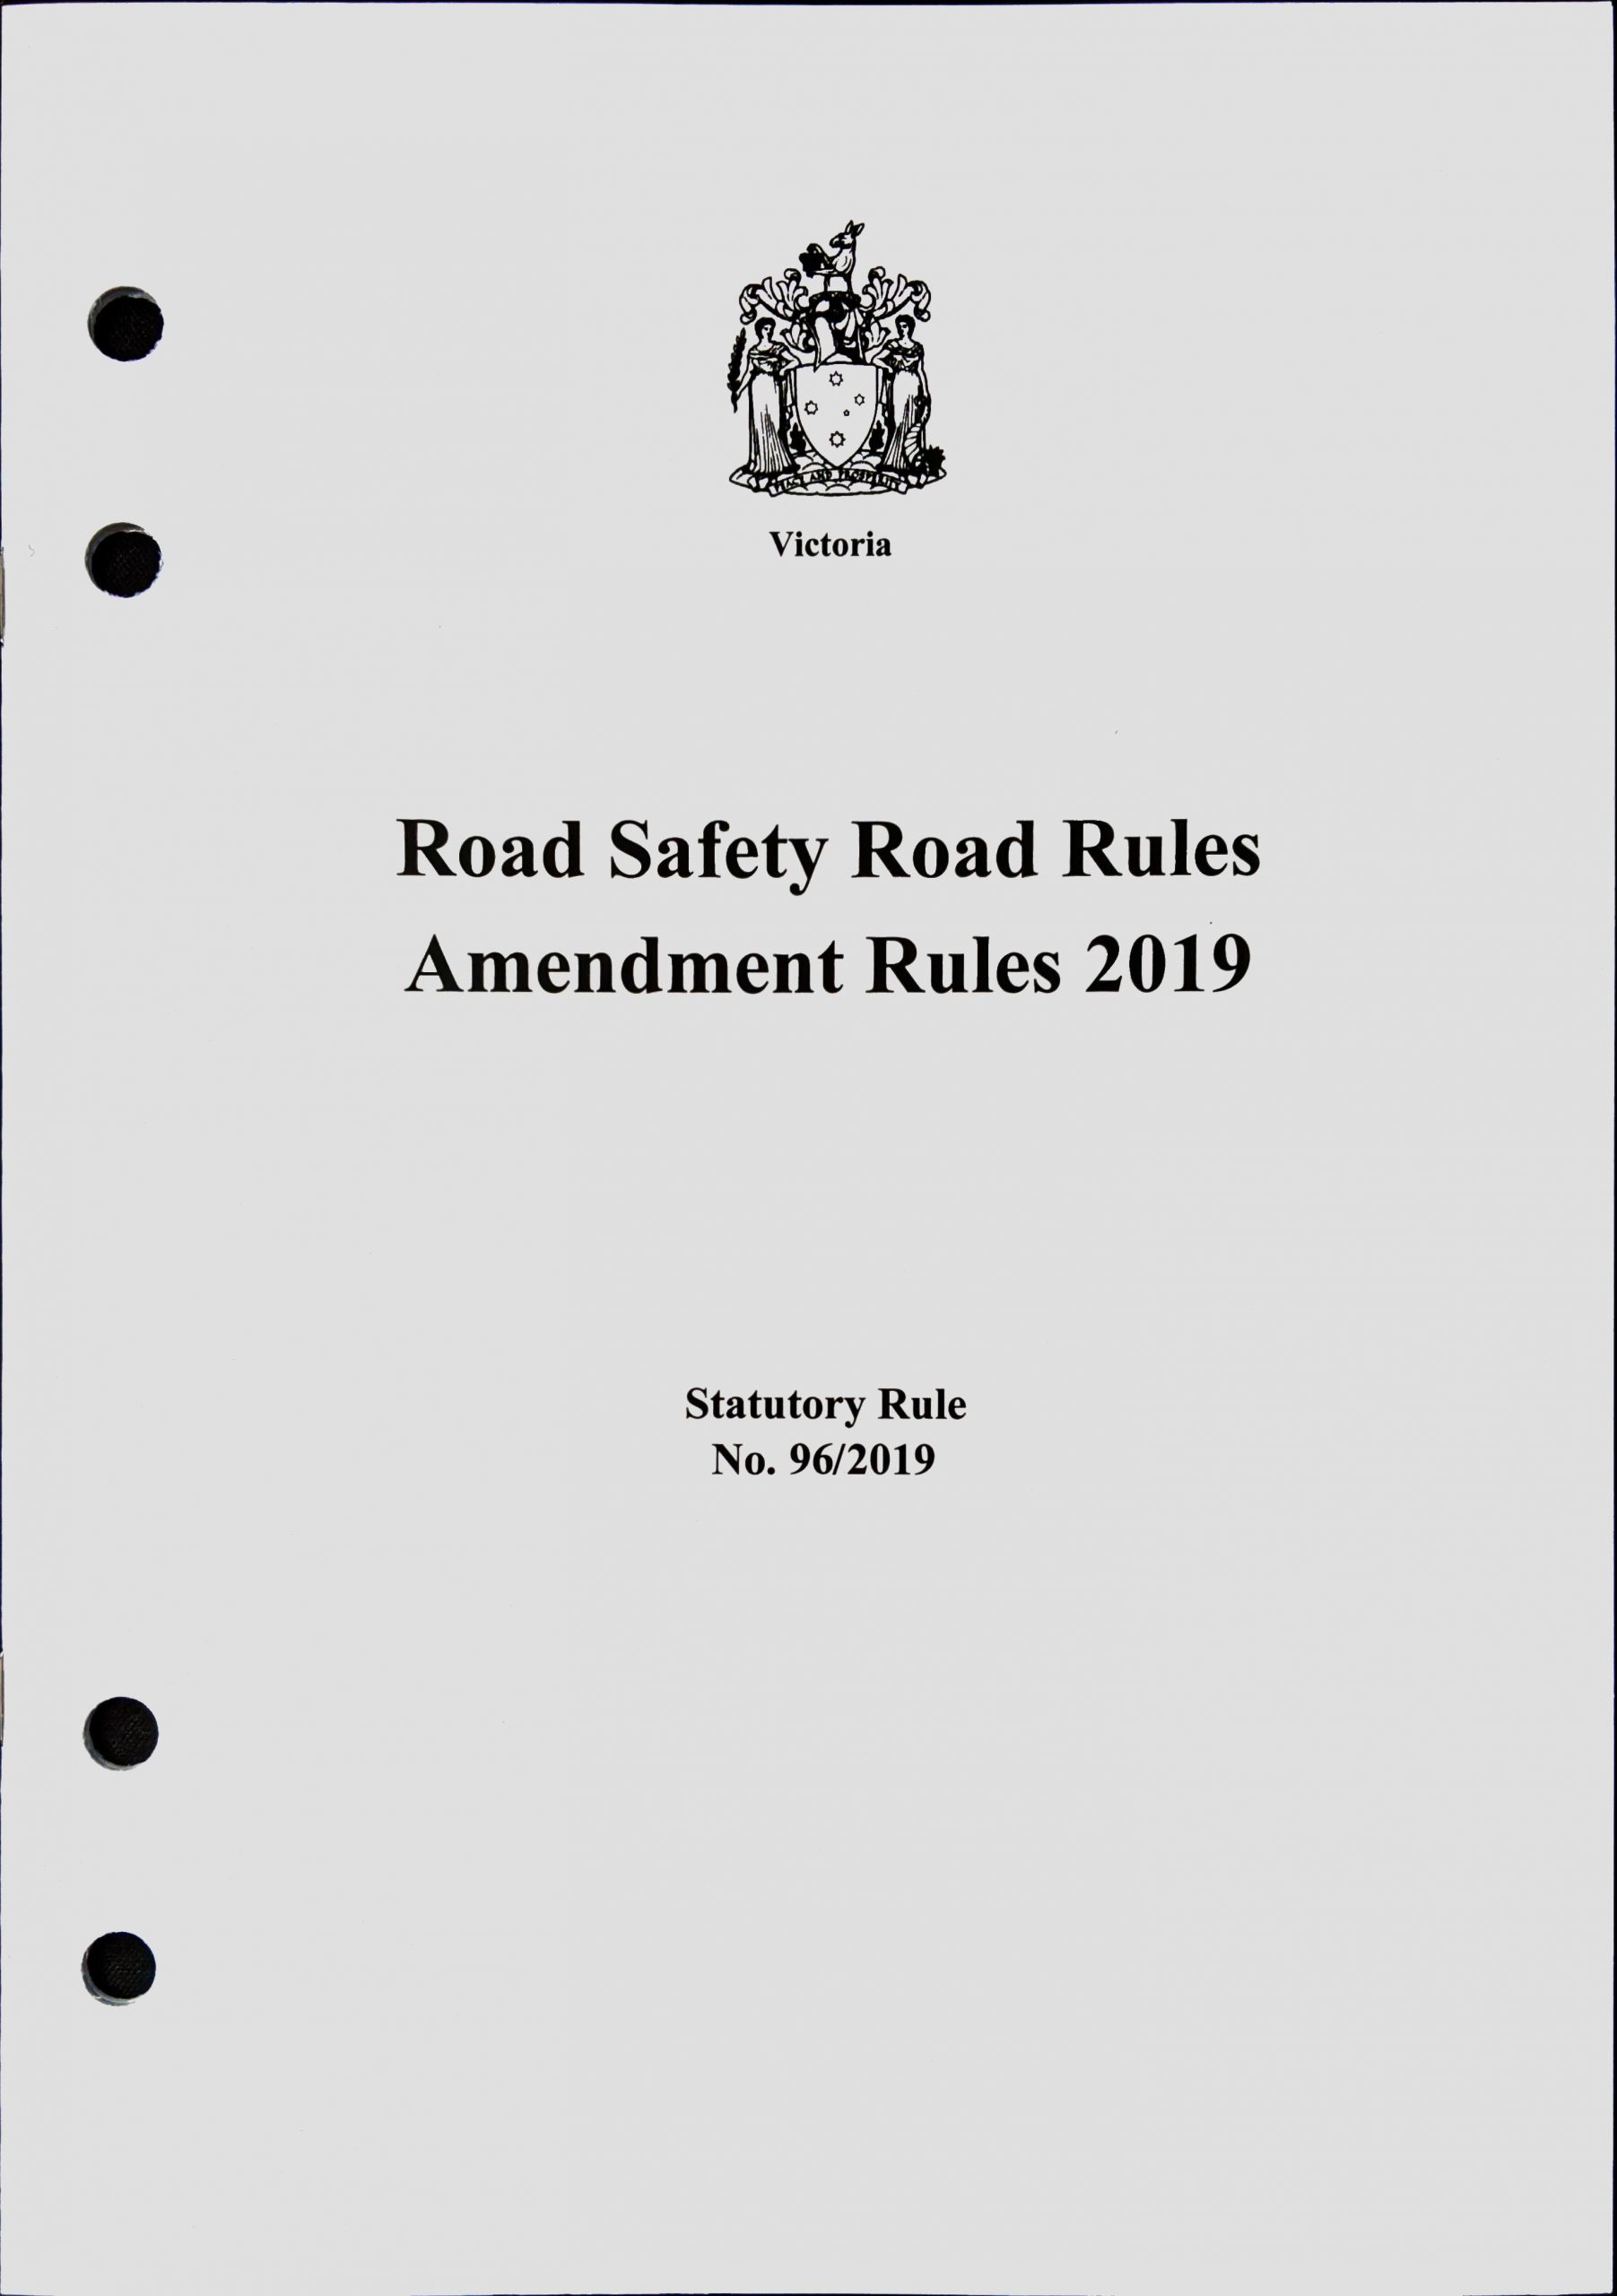 Road Safety Road Rules Amendment Rules 2019